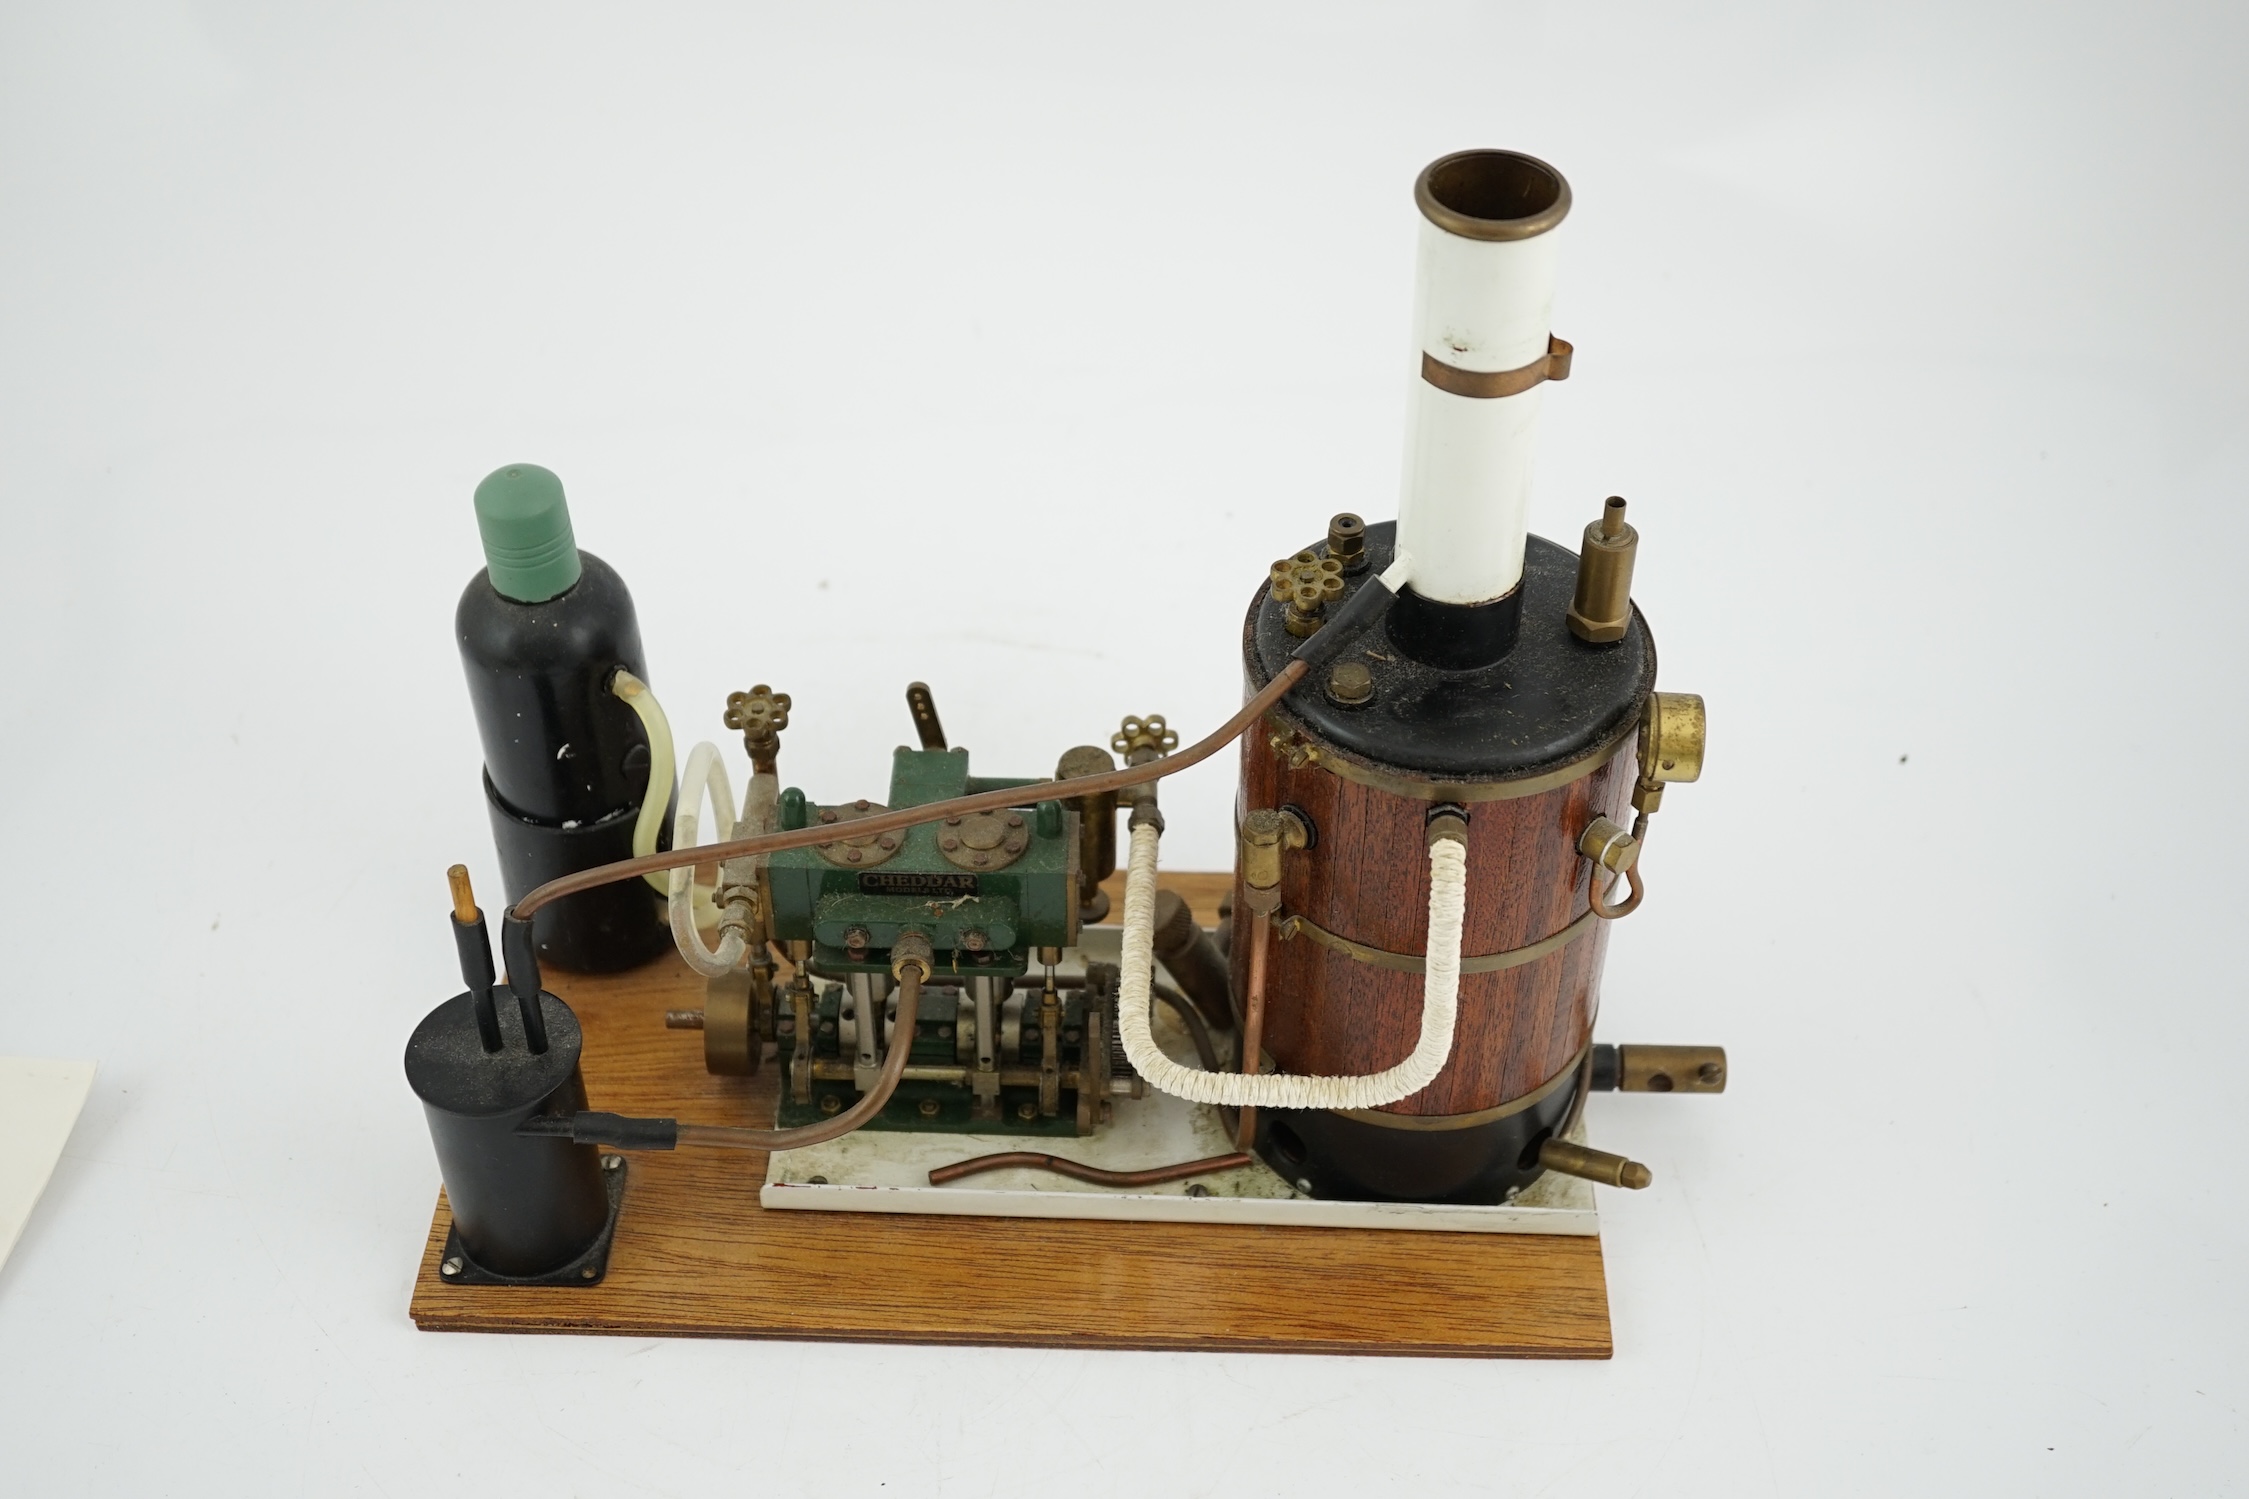 A Cheddar Models Ltd. Proteus steam plant, a gas fired vertical boiler two cylinder marine engine, - Image 6 of 8